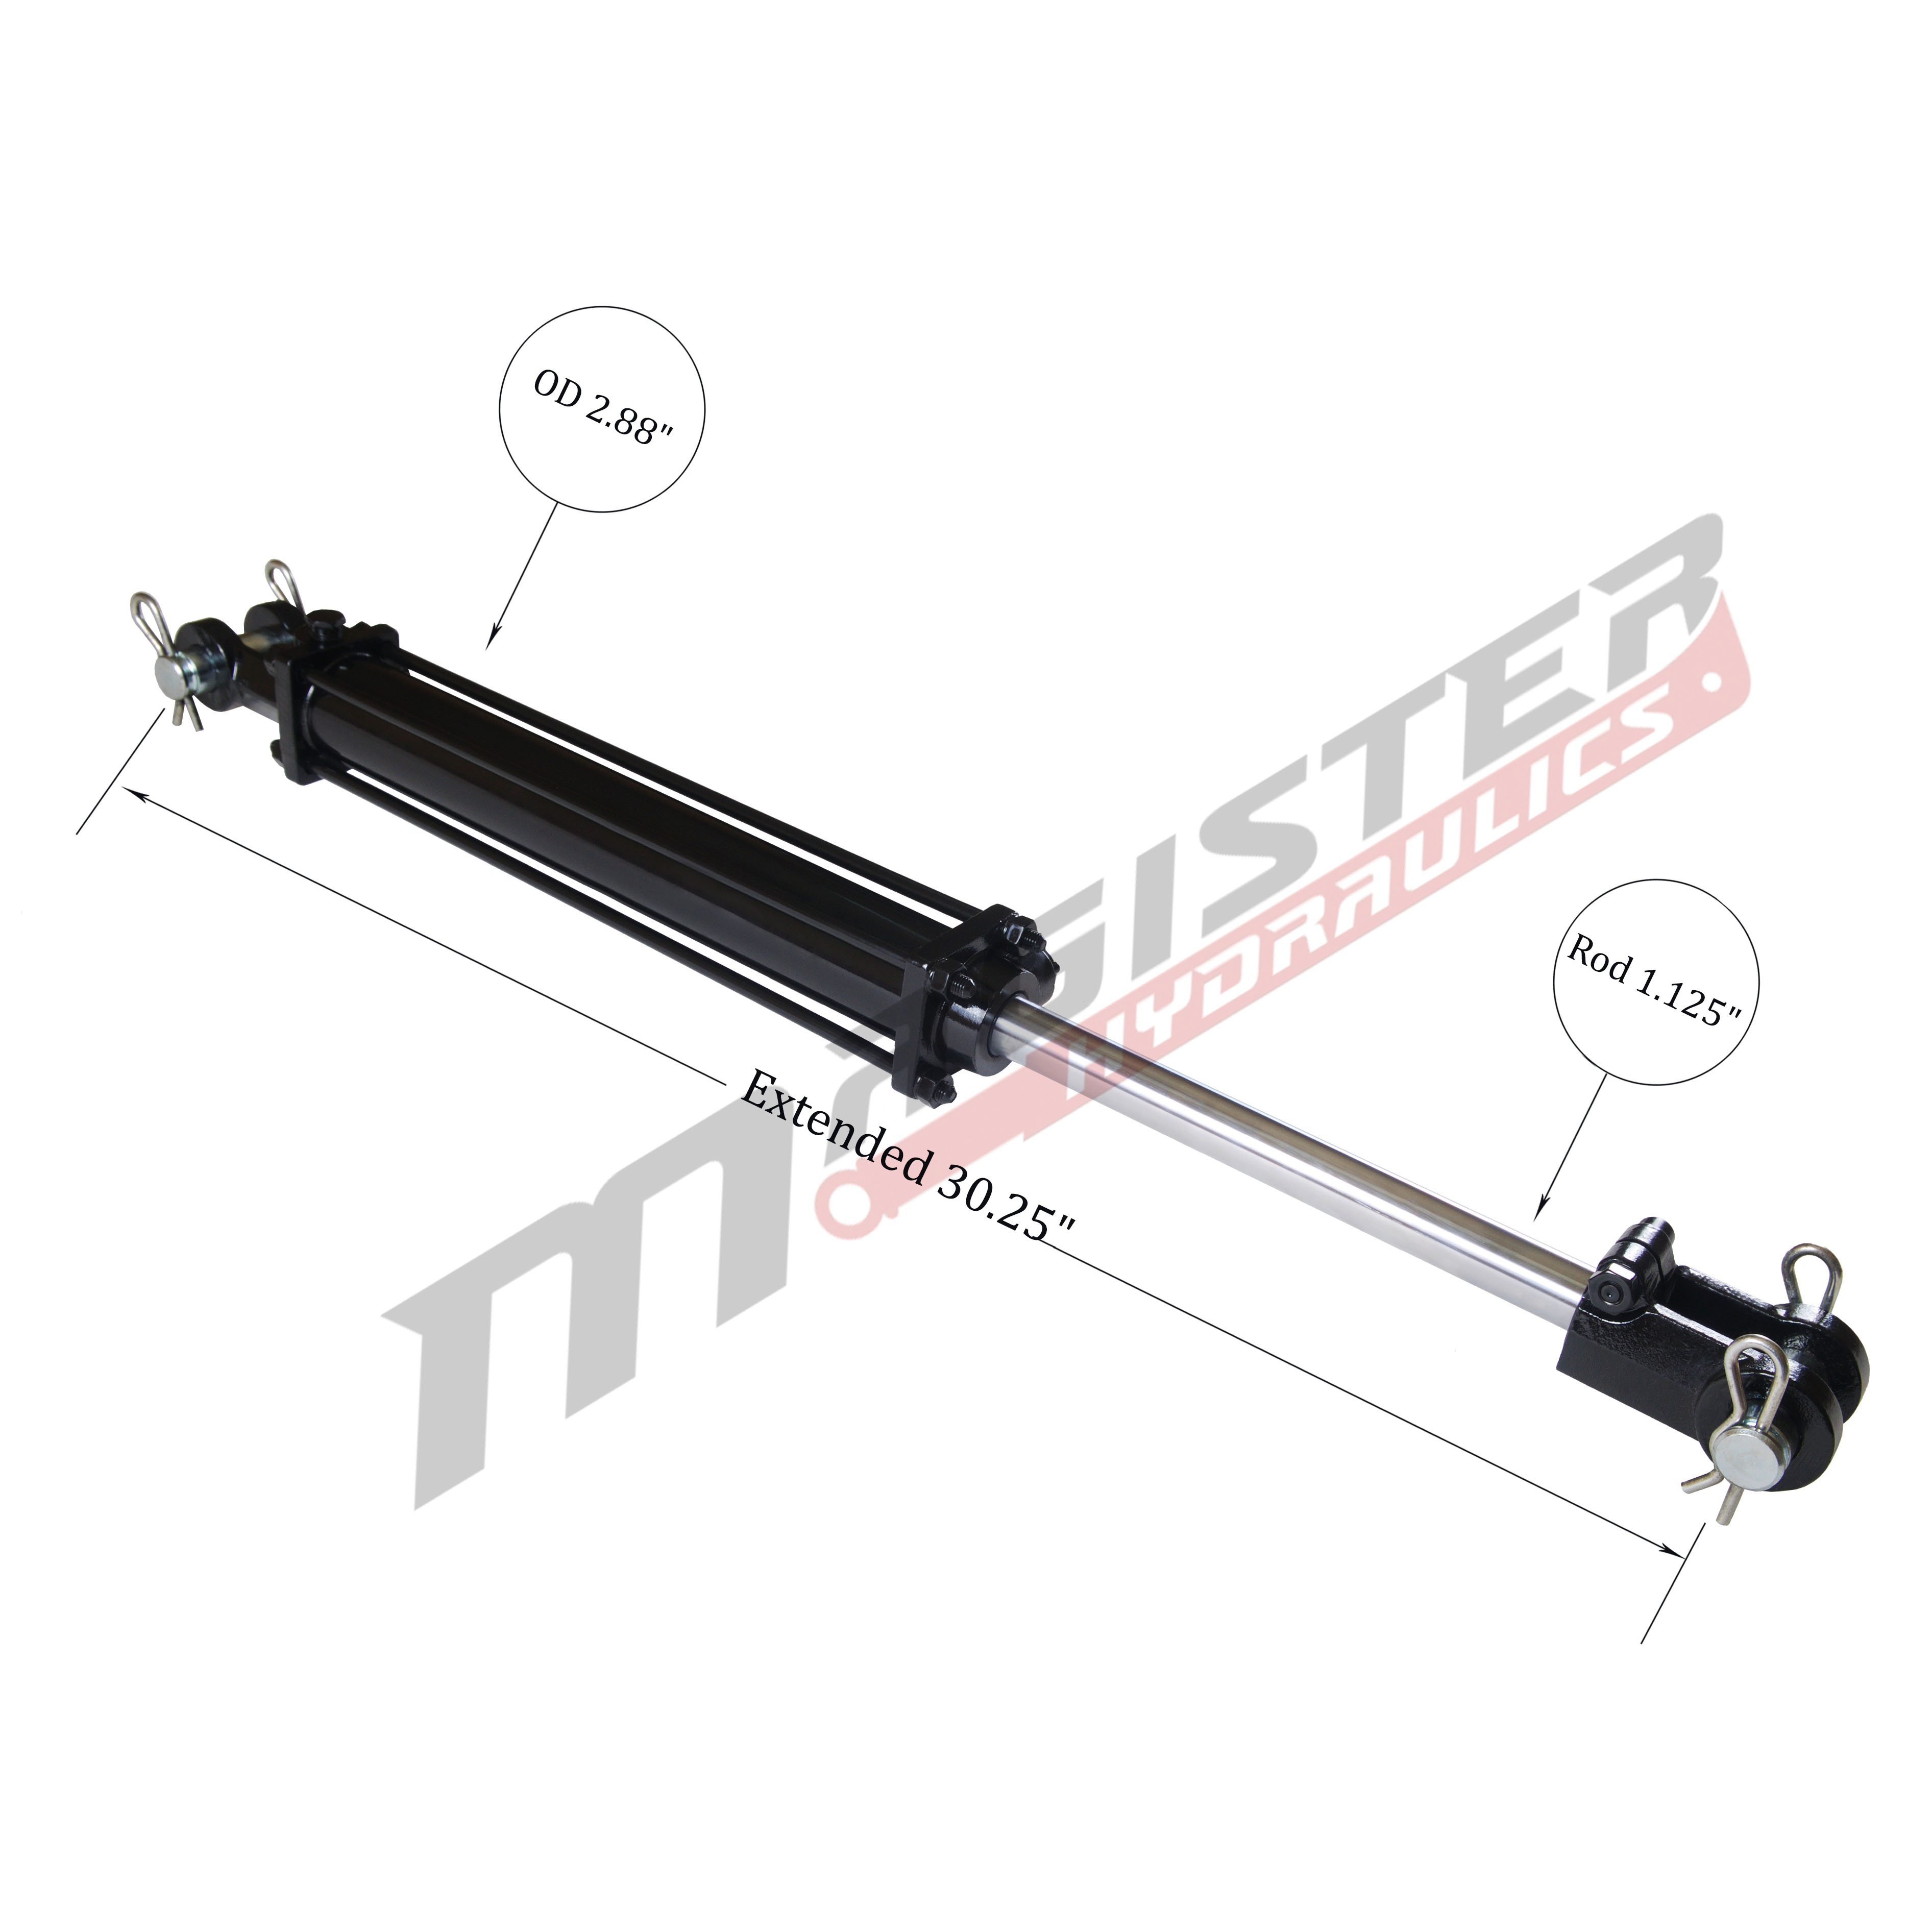 2.5 bore x 10 stroke hydraulic cylinder, tie rod double acting cylinder | Magister Hydraulics